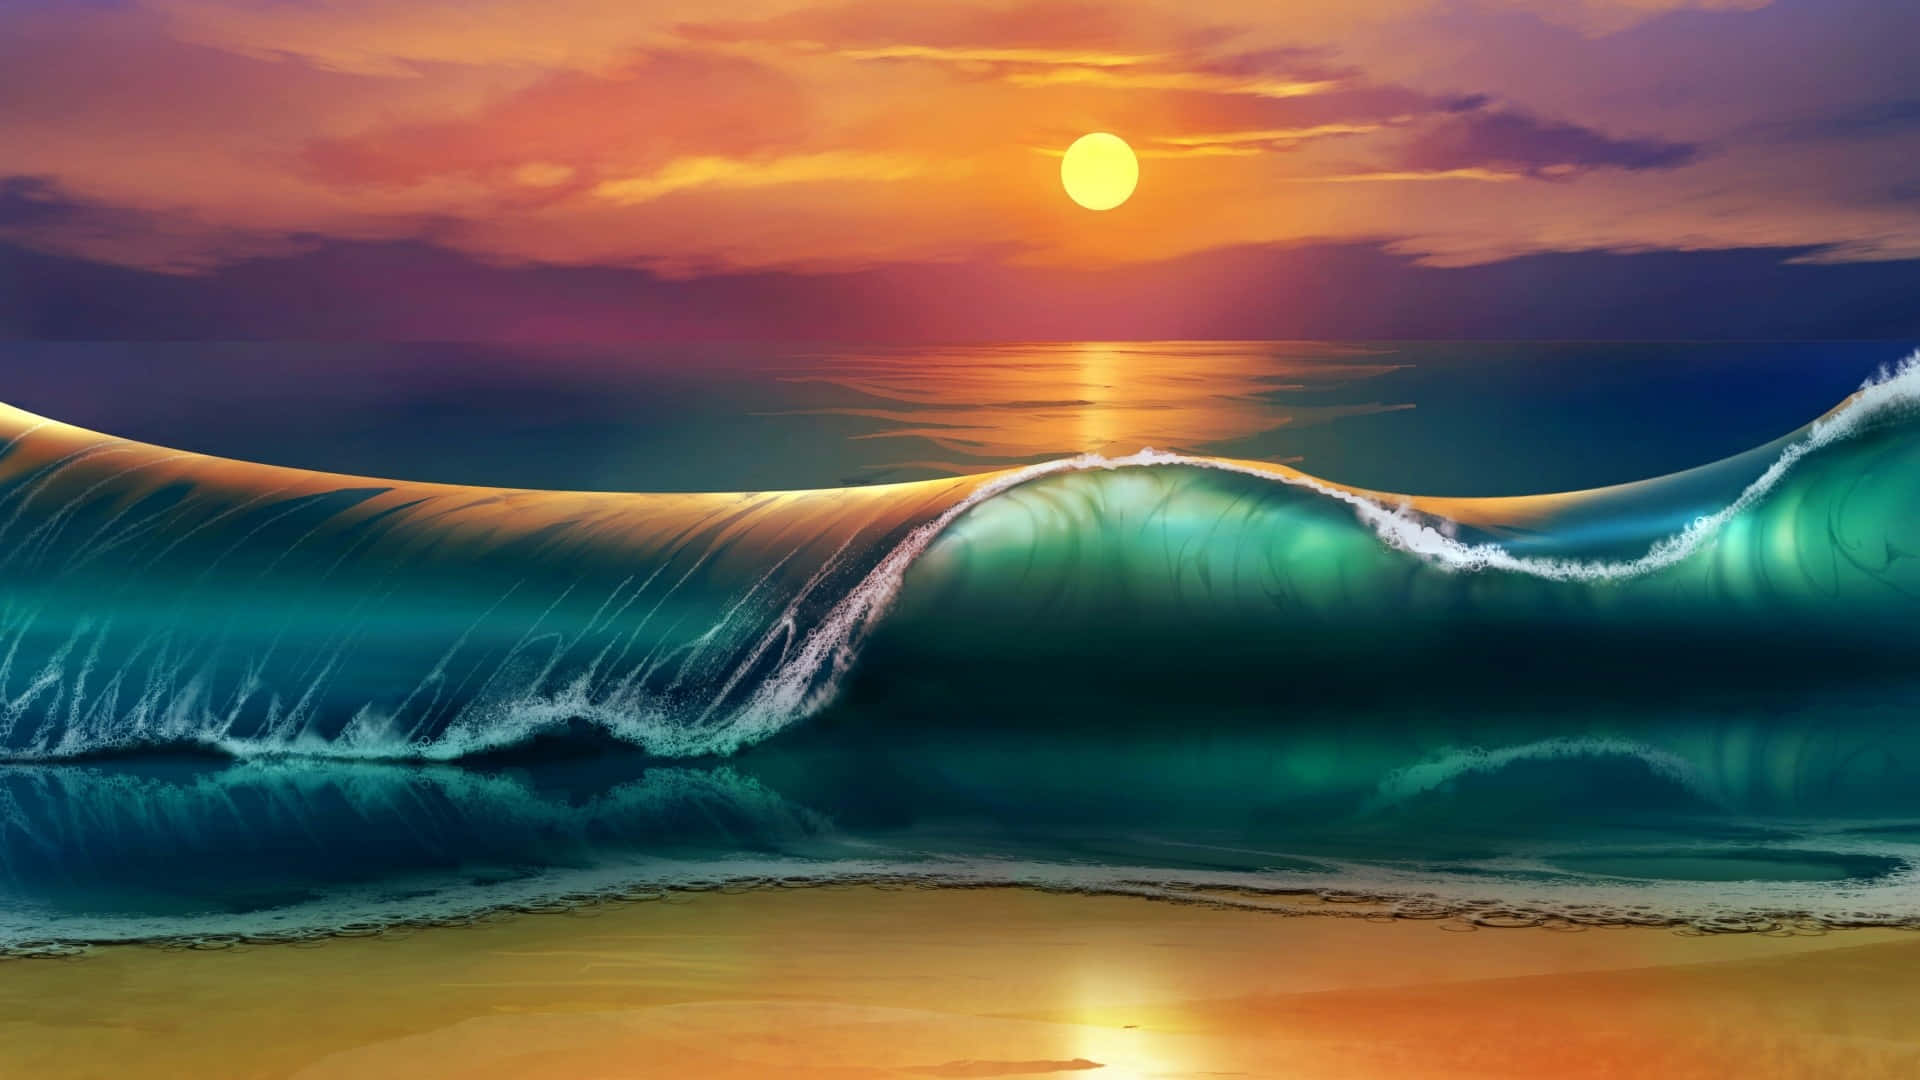 Tranquil Sunset Over a Magical Ocean